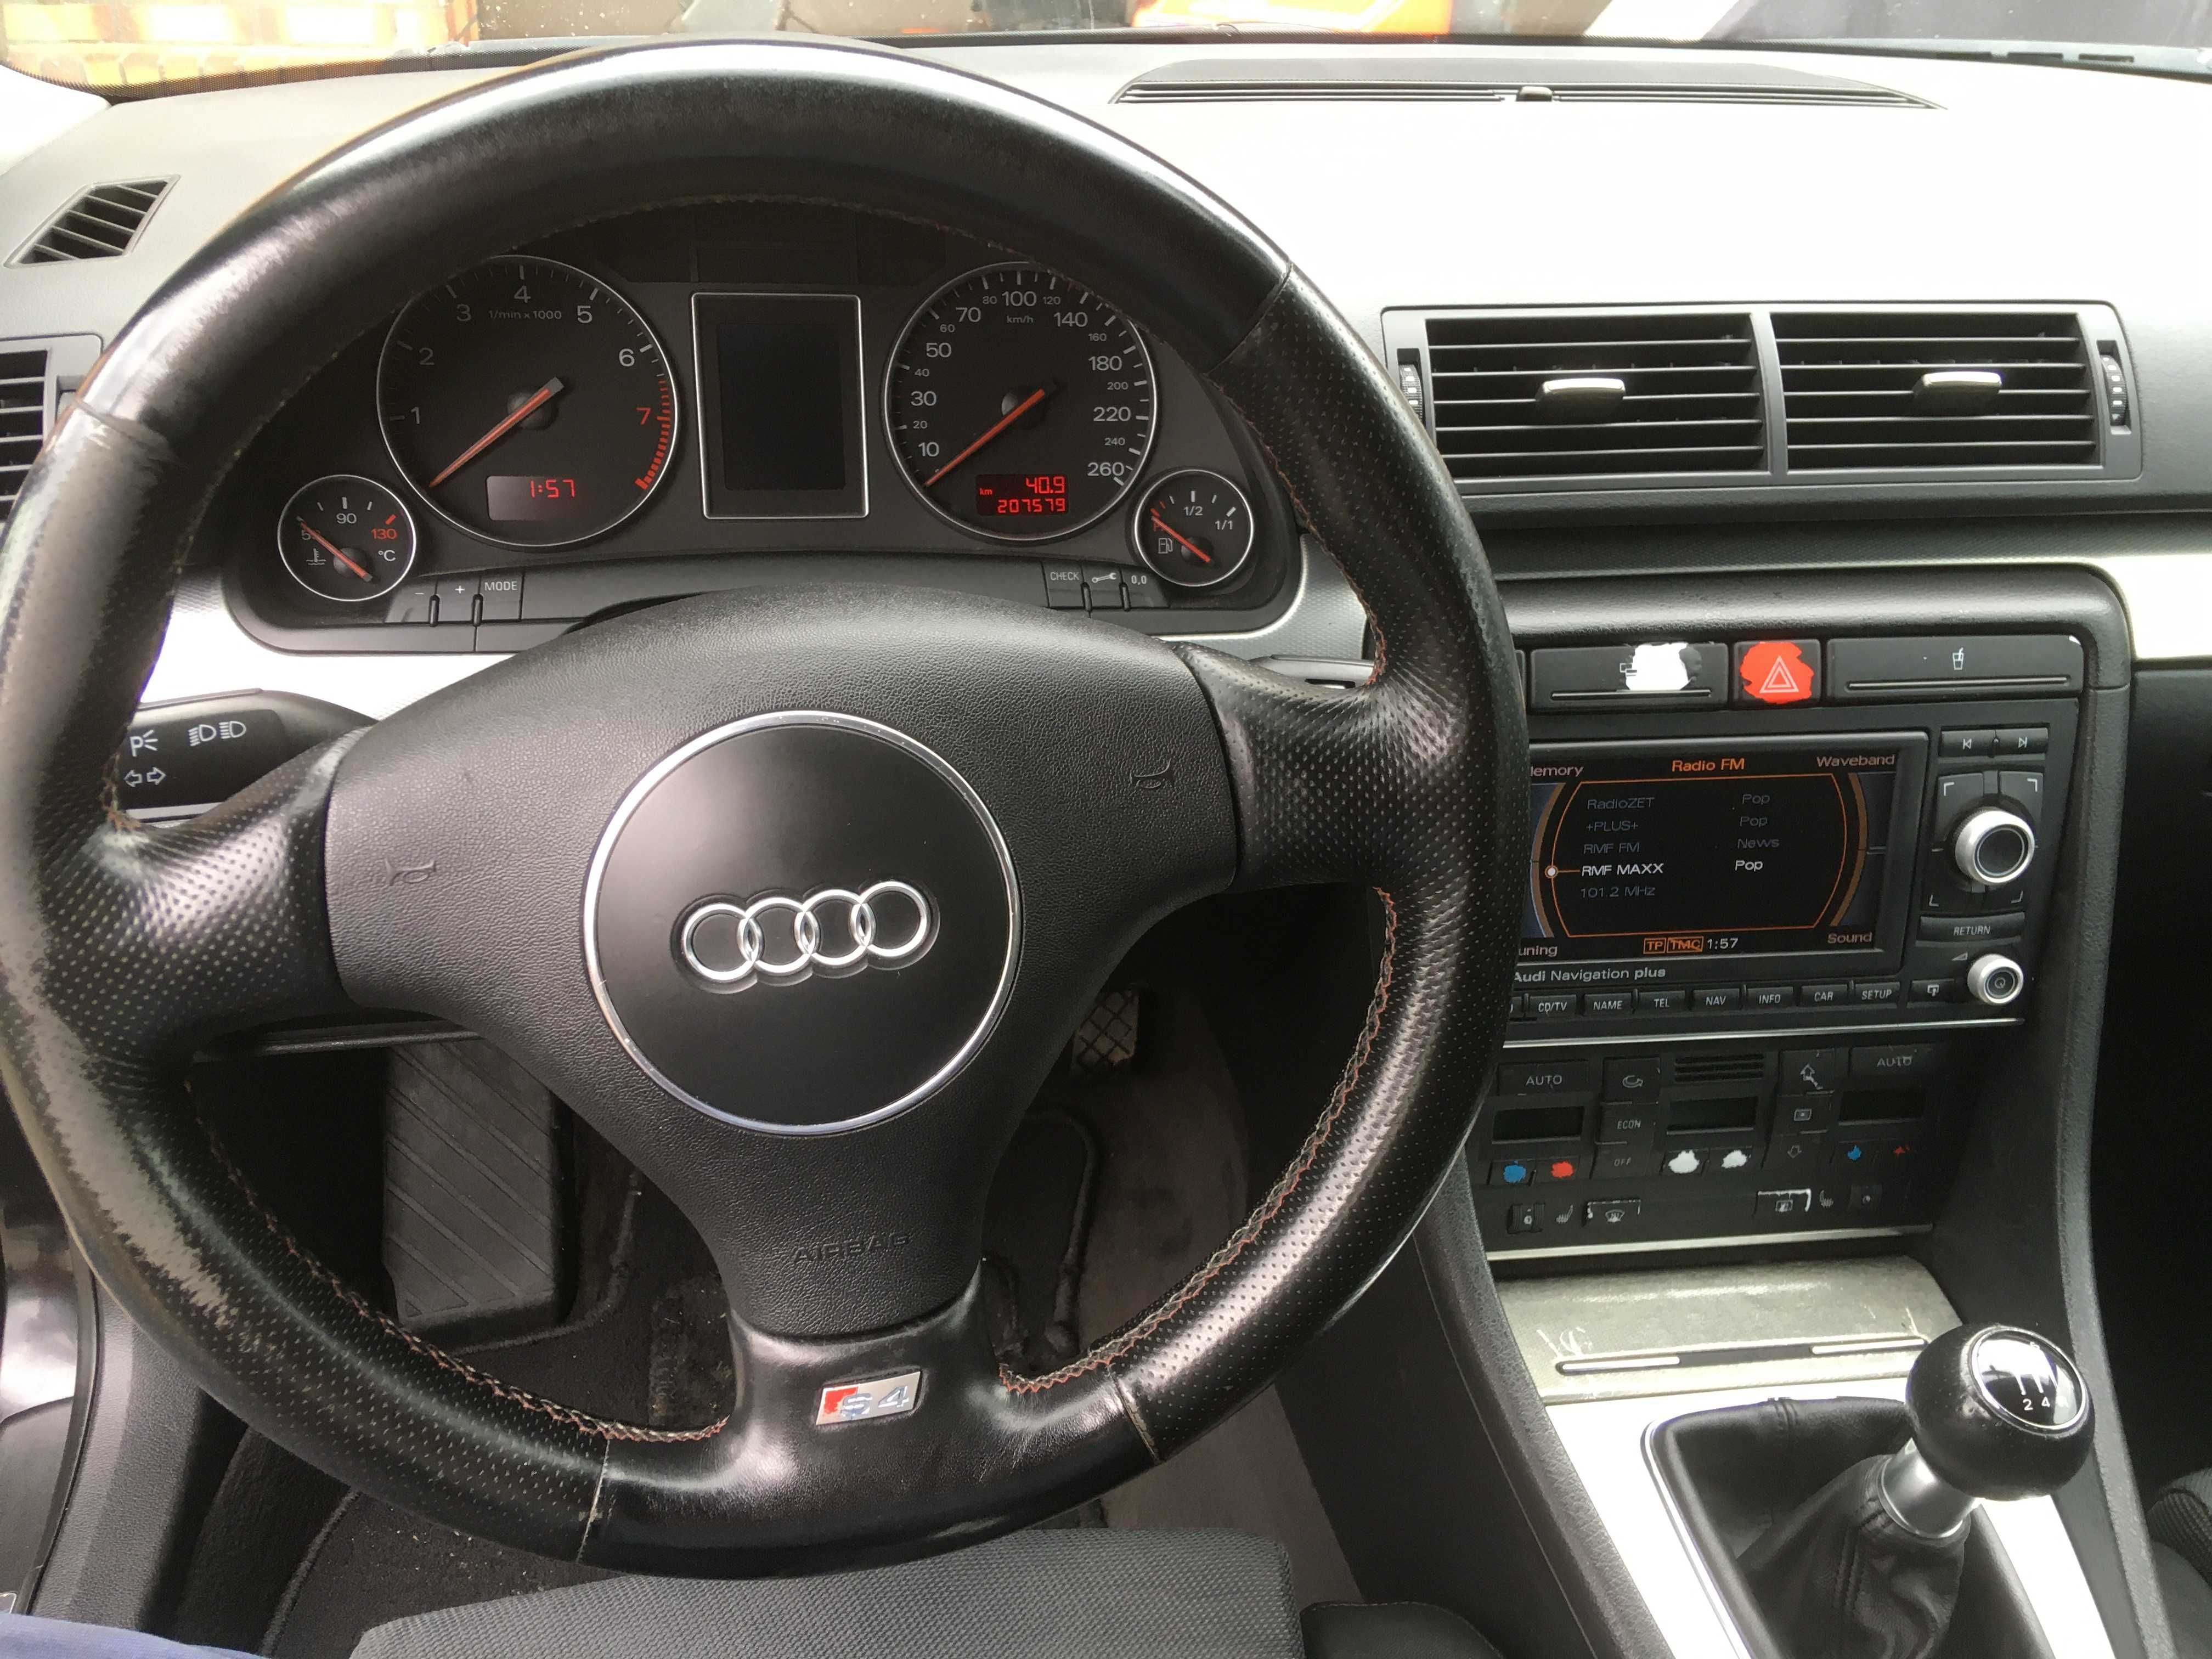 AUDI A4 S4 S-LINE 1,8T 240KM tuning